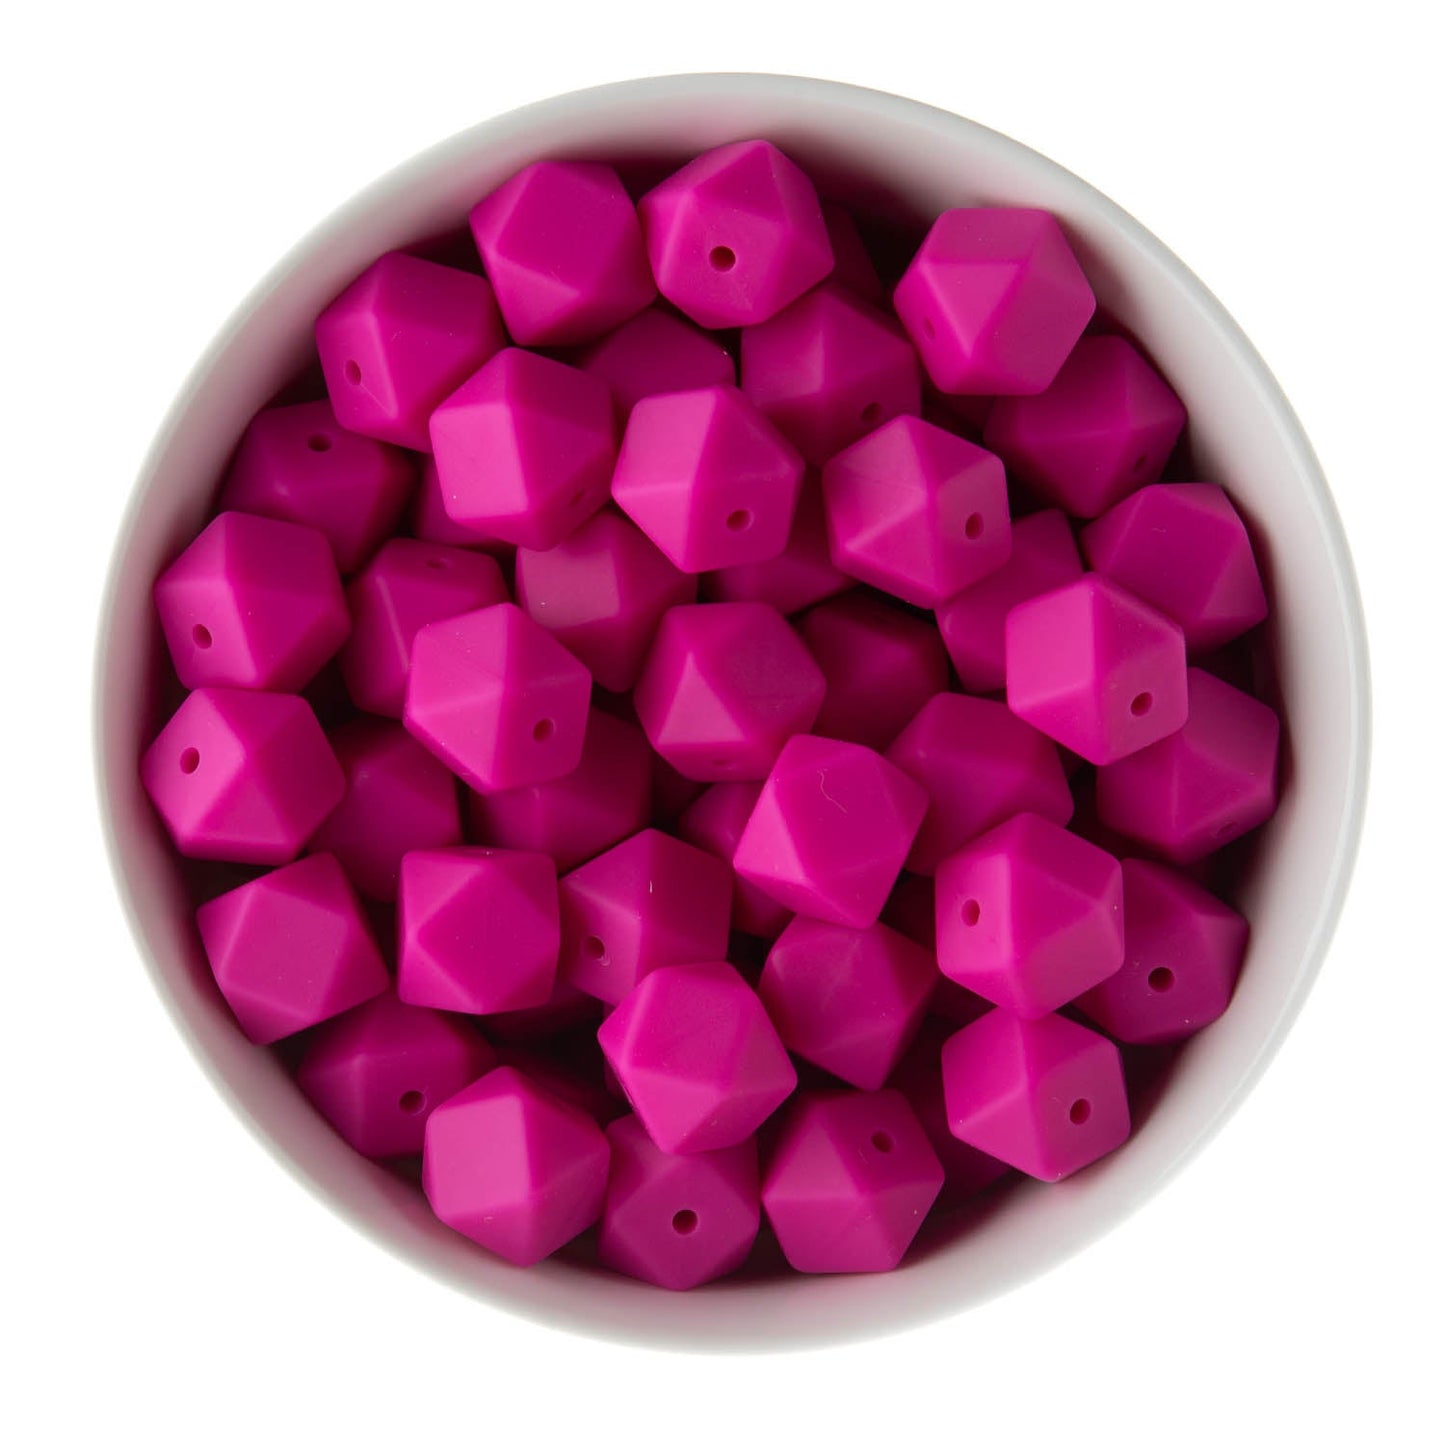 14mm Hexagon Silicone Beads